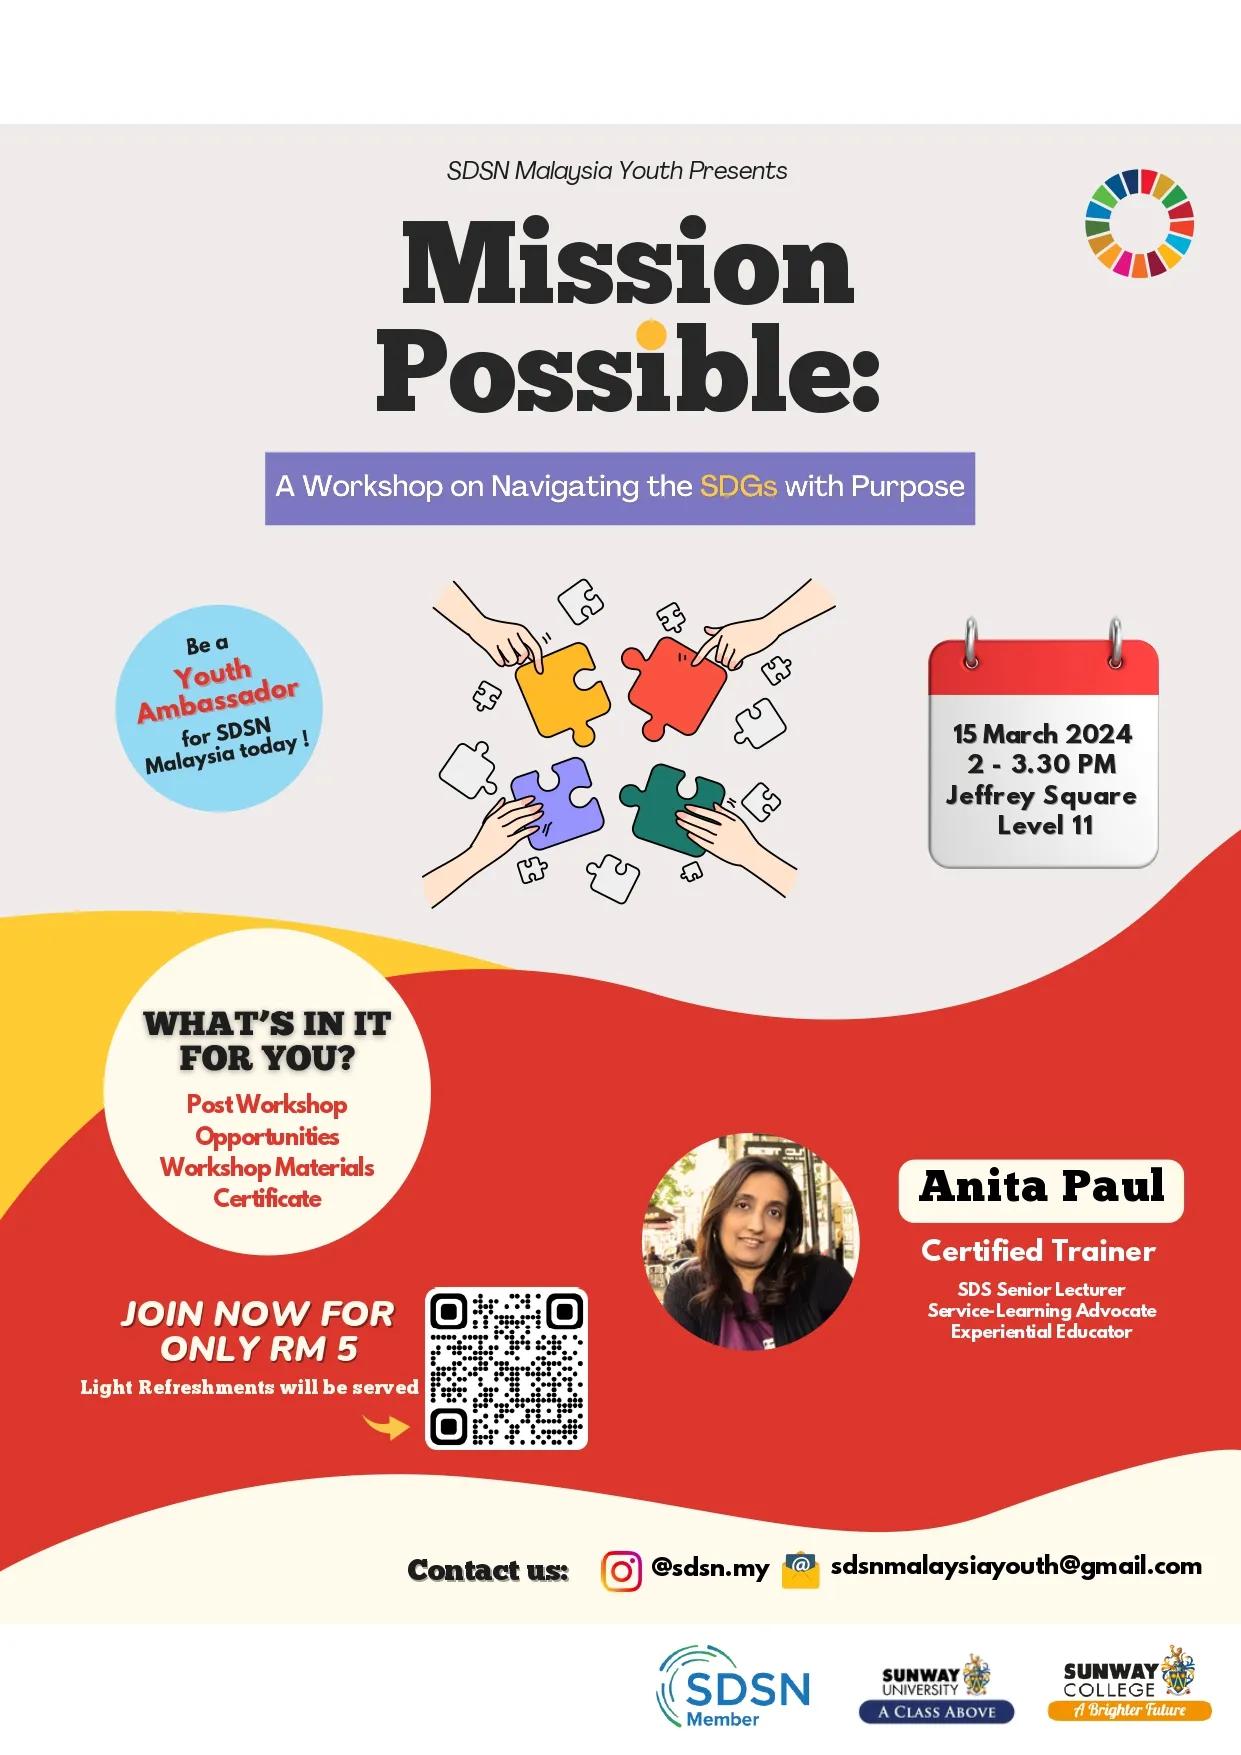 Mission Possible: A Workshop on Navigating the SDGs with Purpose